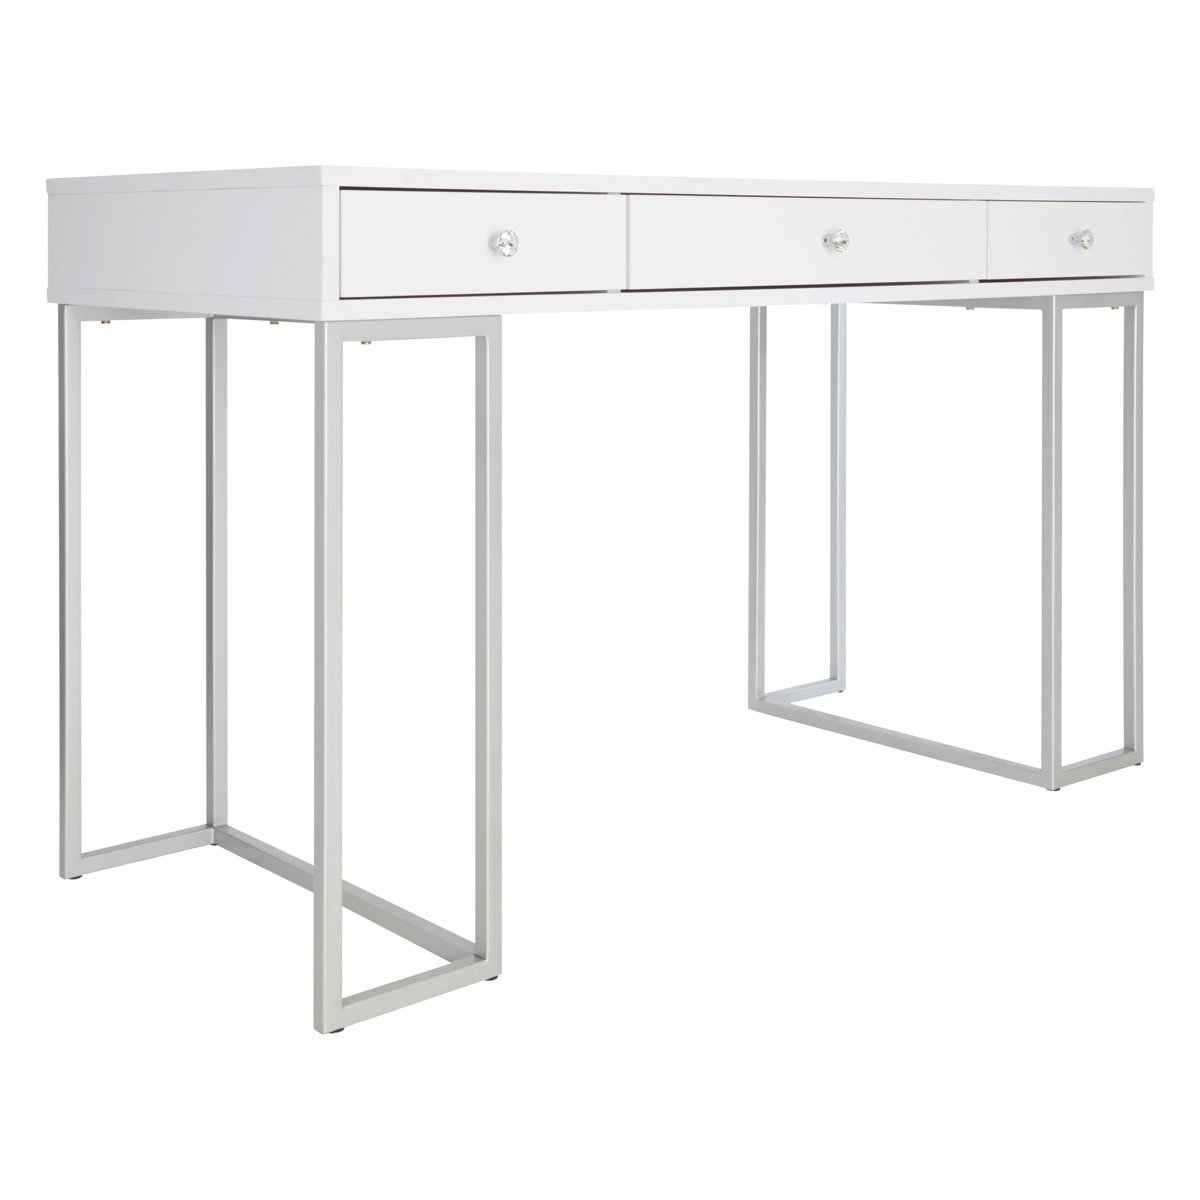 Impressions Vanity Premium Makeup Desk, Celeste Modern Table with 3 Drawers and Crystal Knobs, Perfect for Bedroom Decore (White) - image 3 of 6